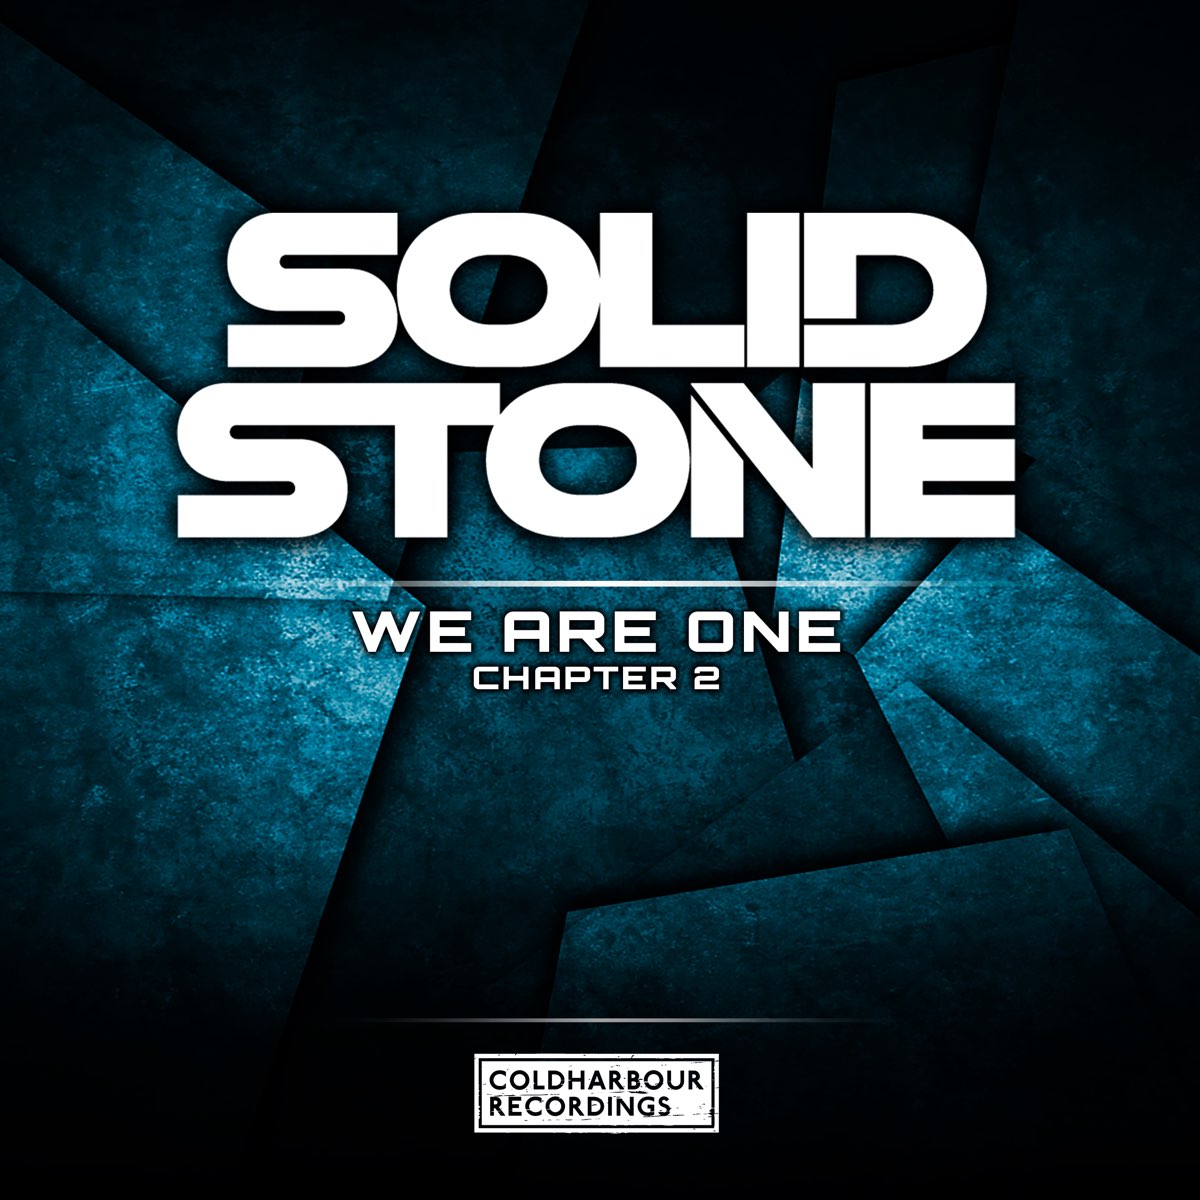 Solid Stone Black Market. Coldharbour. Coldharbour recordings CD. Featuring.